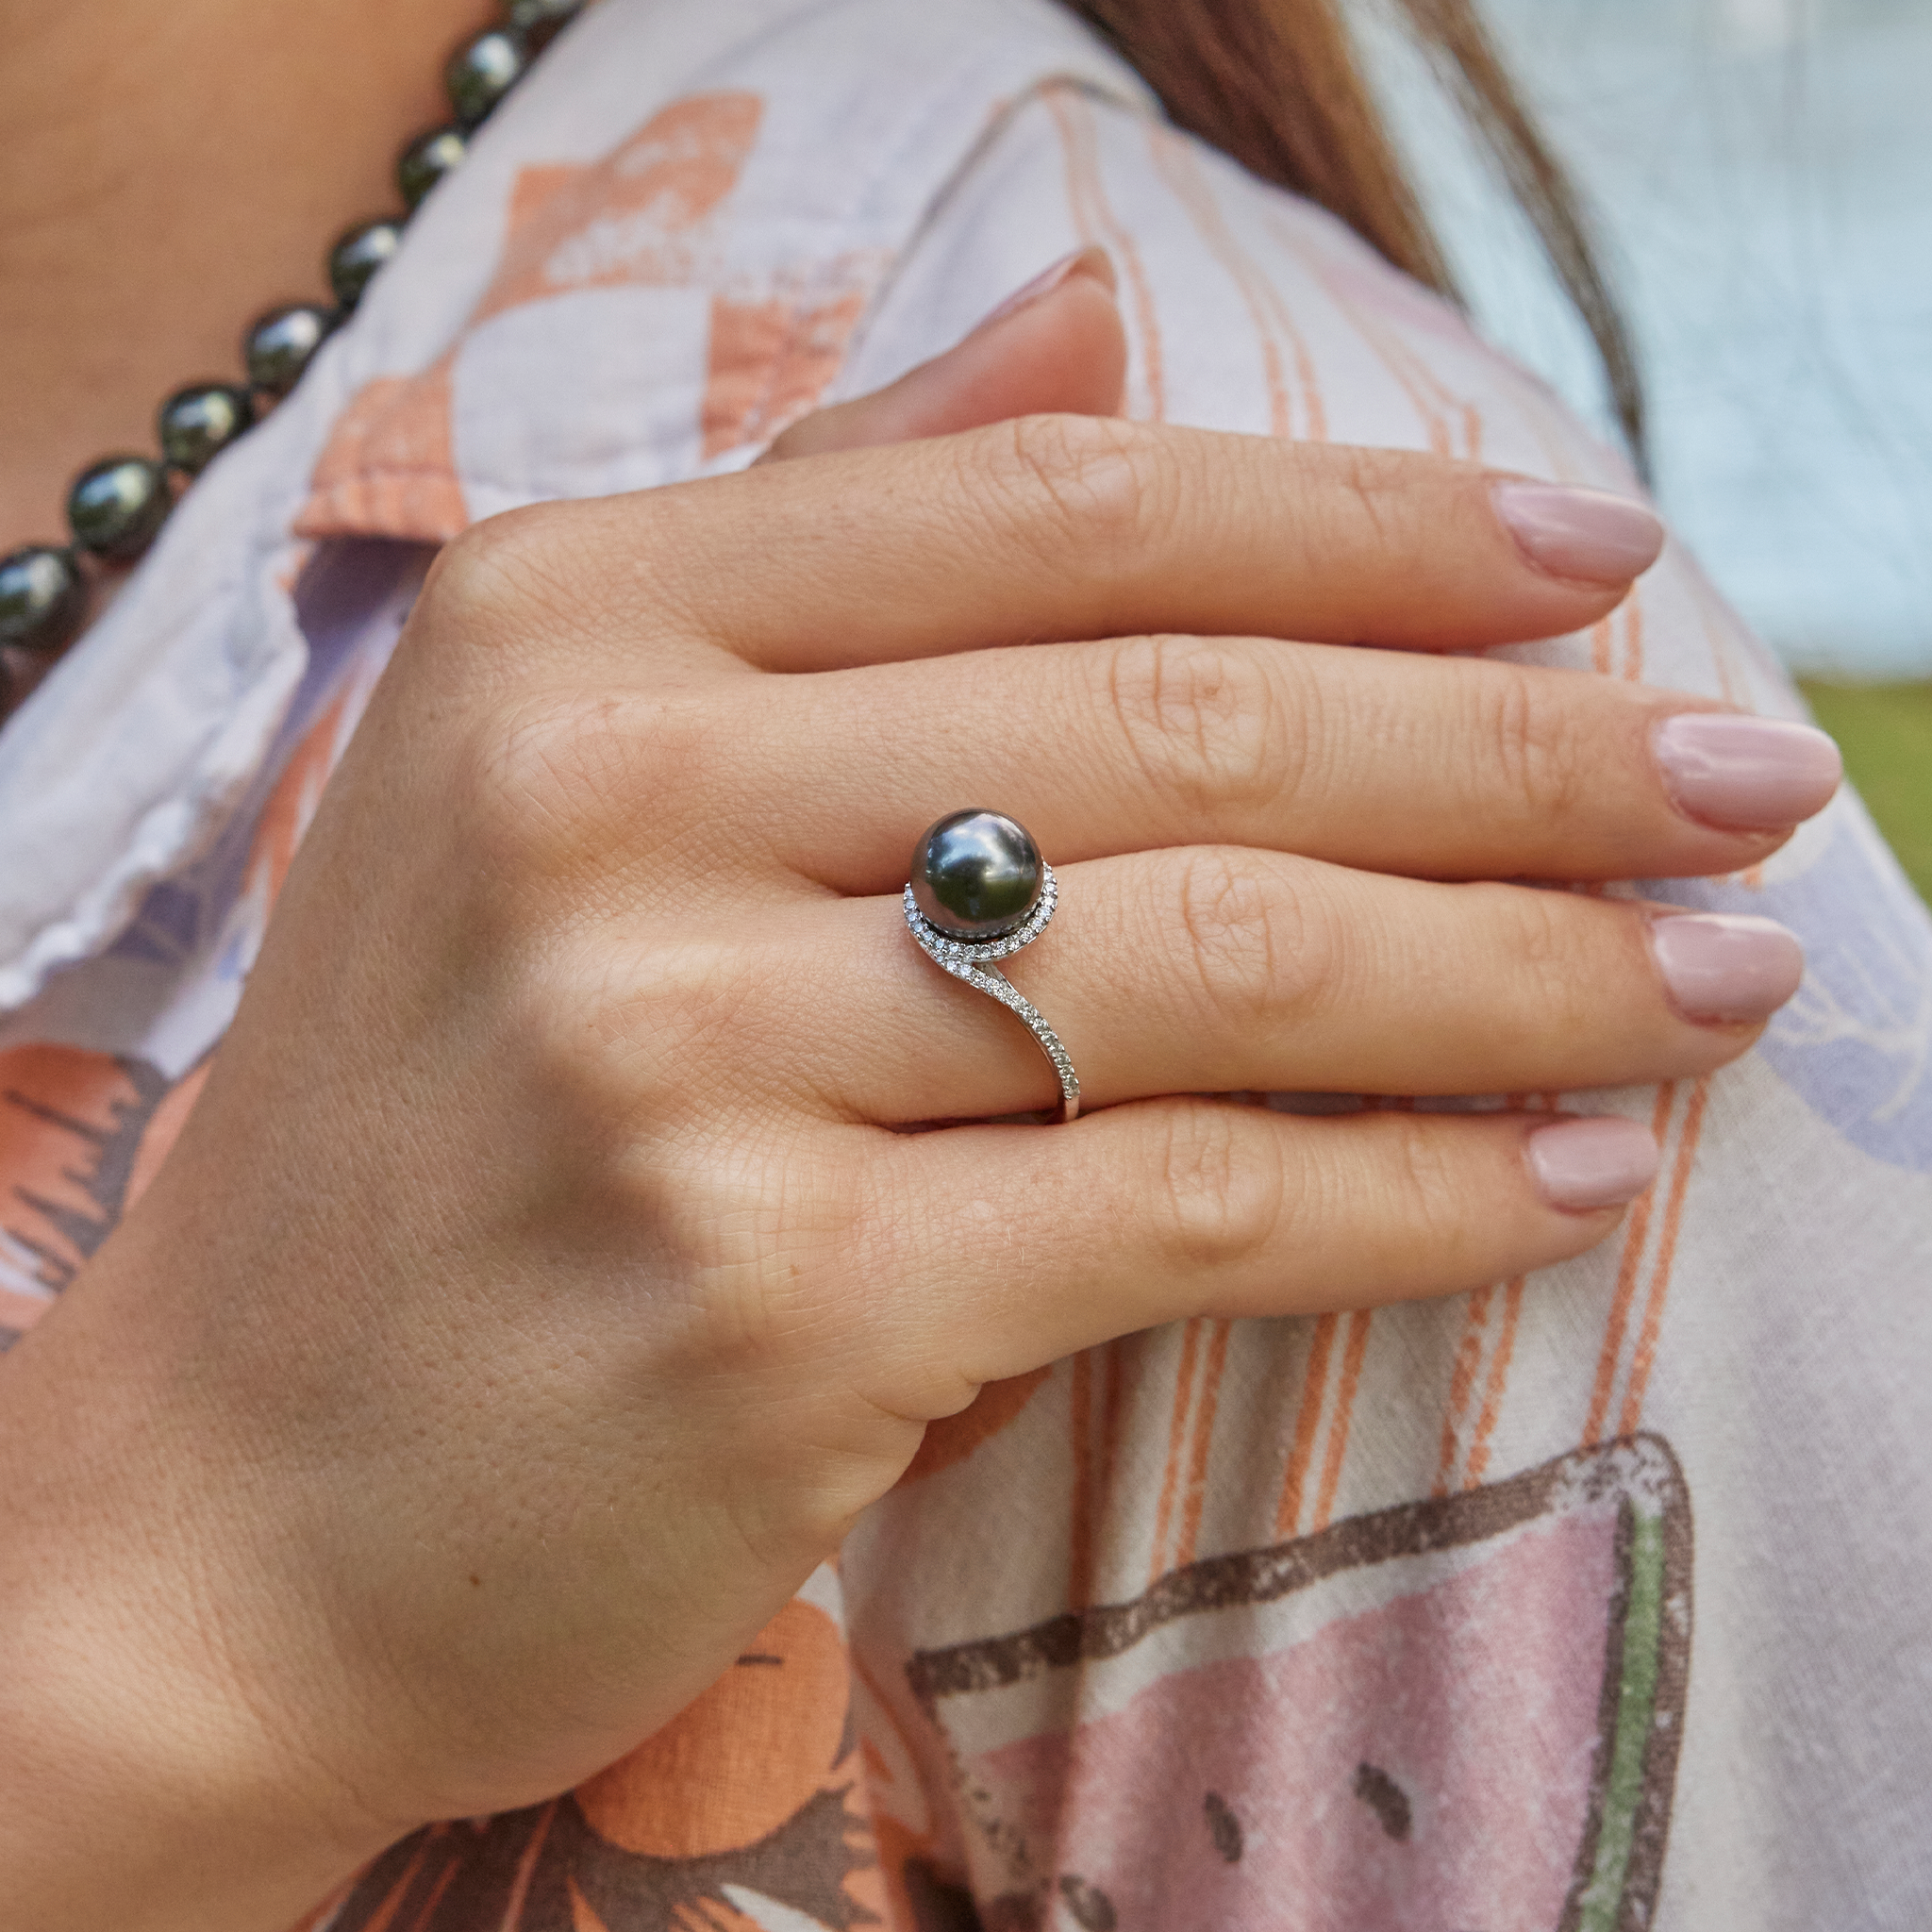 Tahitian Black Pearl Ring in White Gold with Diamonds - 9-10mm